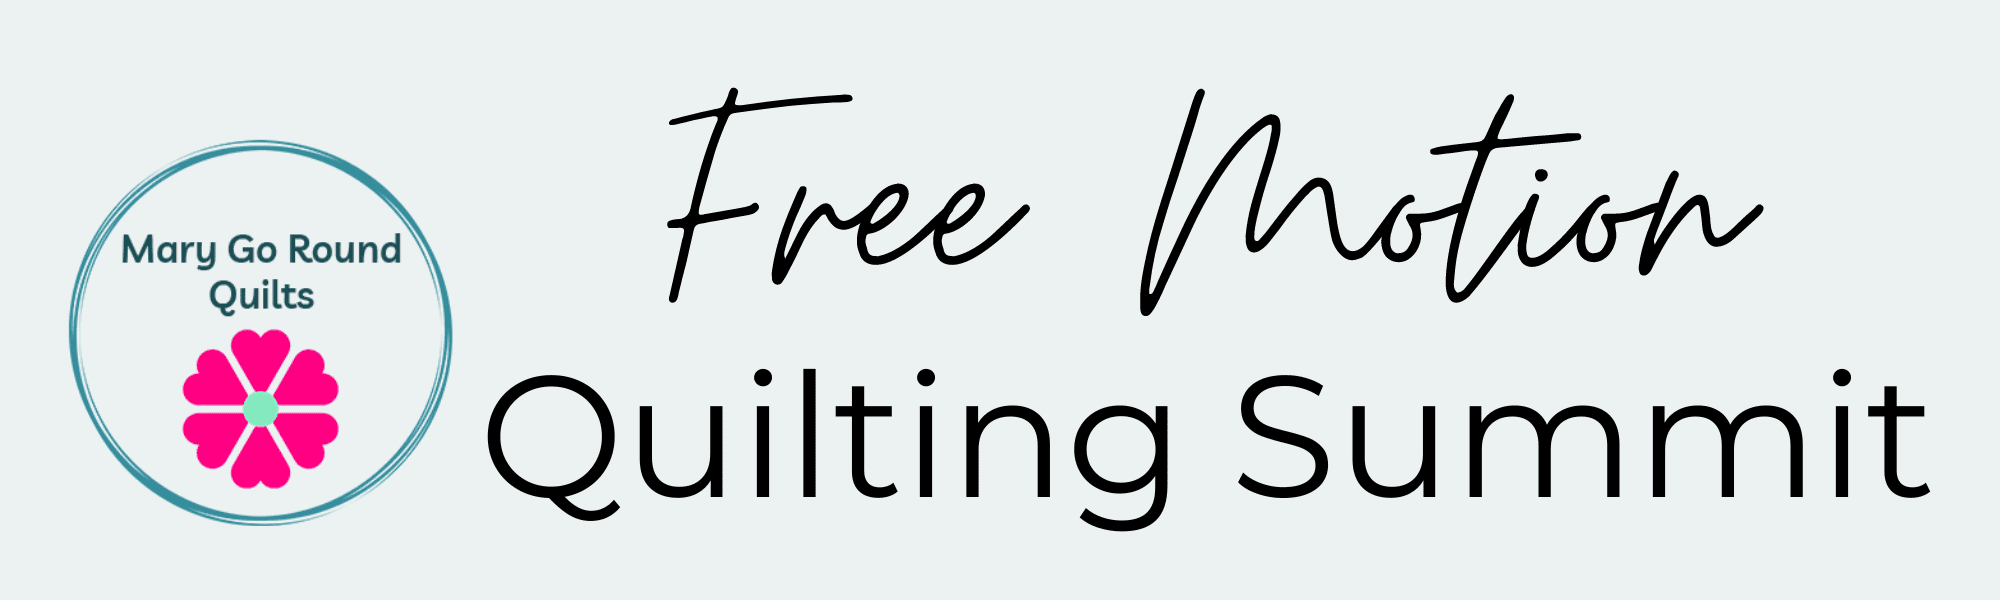 Free Motion Quilting Summit